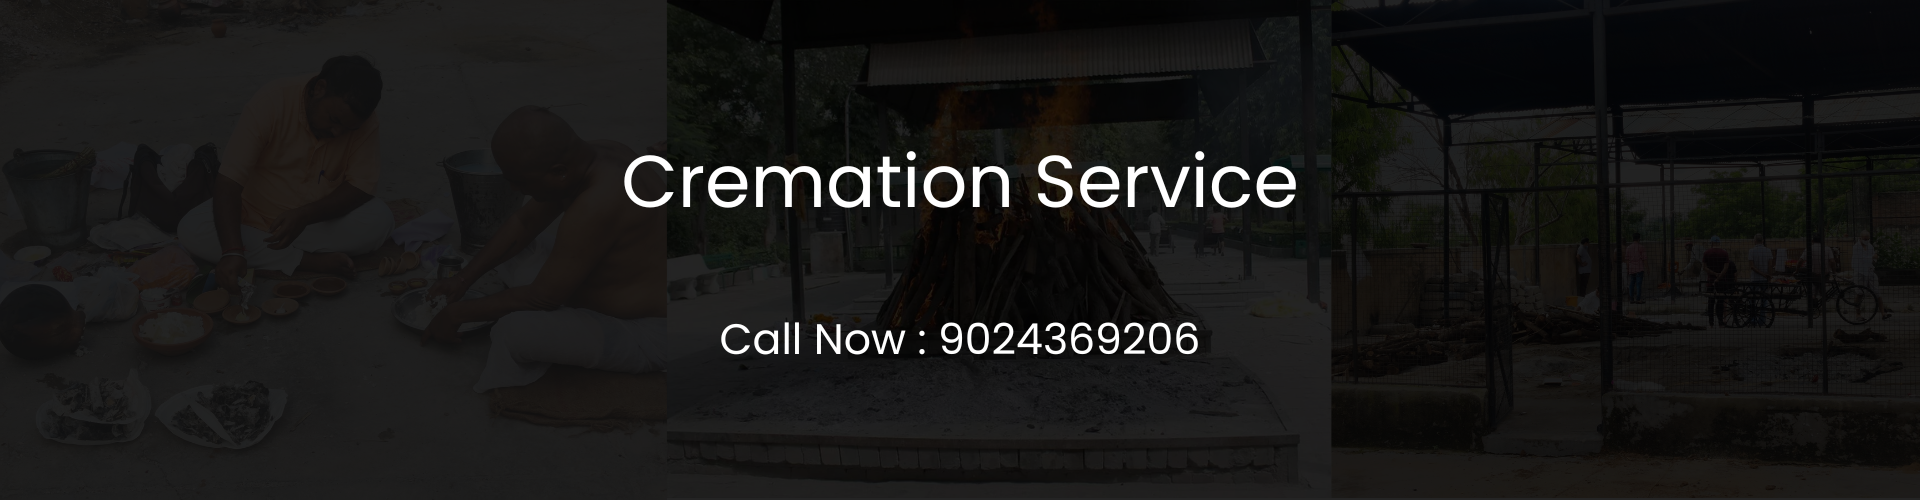 Cremation Service In India